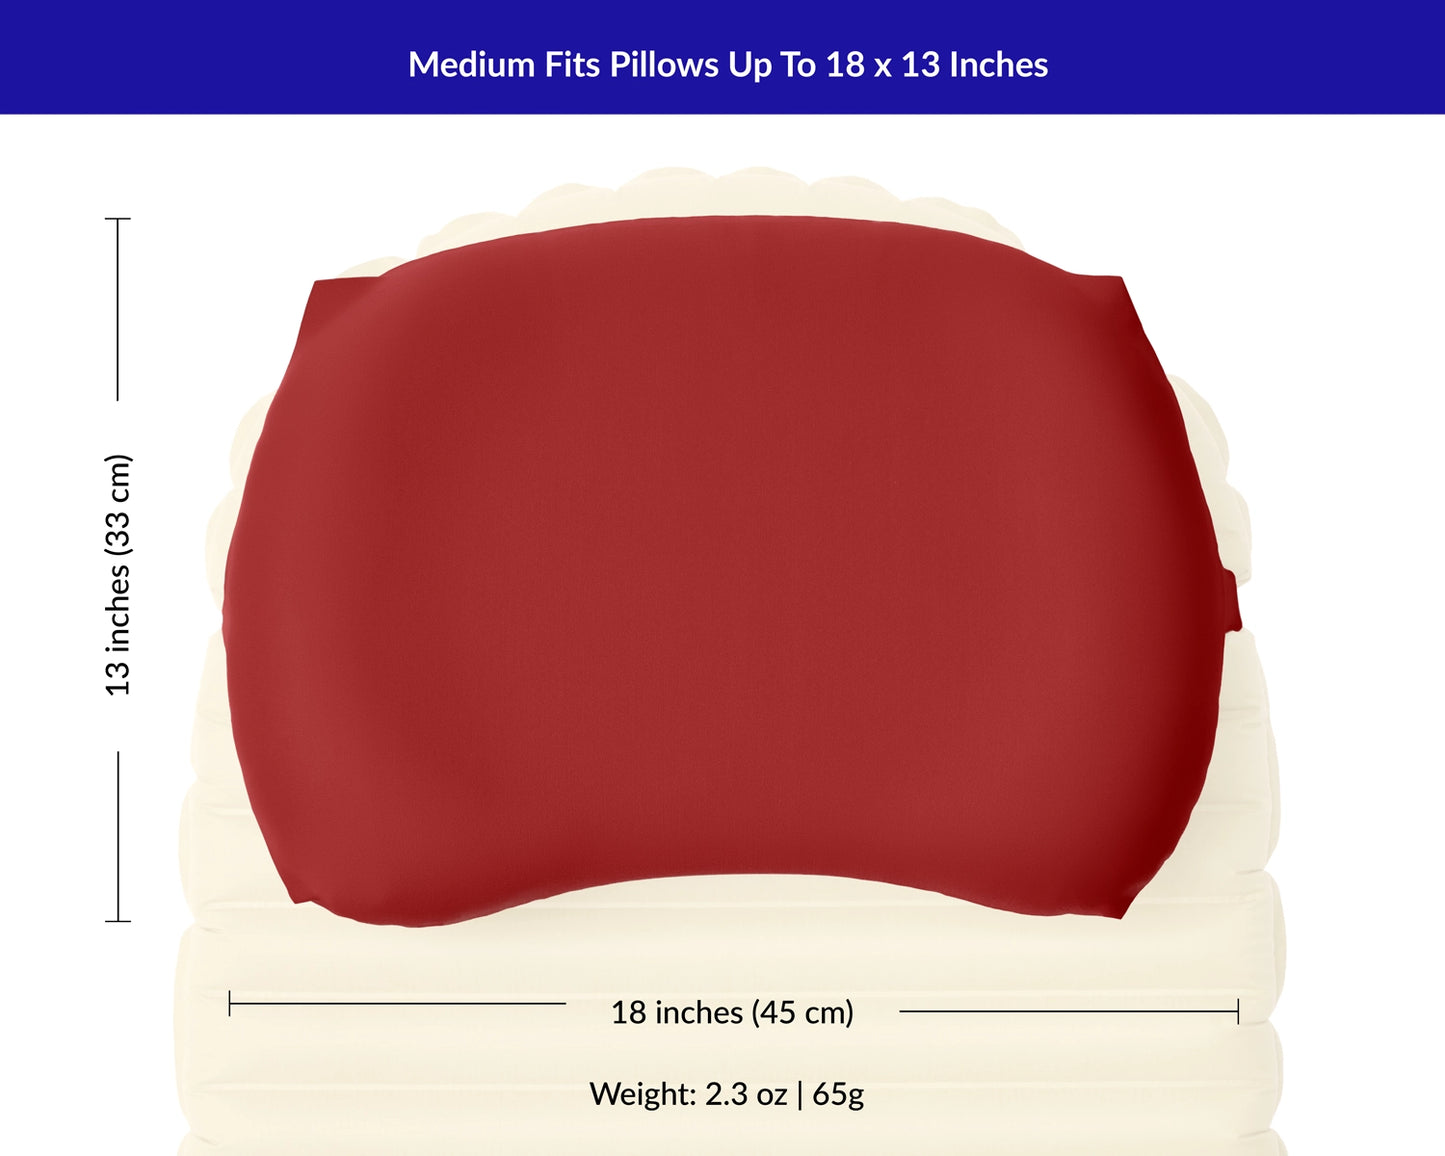 Measurements for maximum camp pillow size for medium Pillow Strap is 18 by 13 inches.